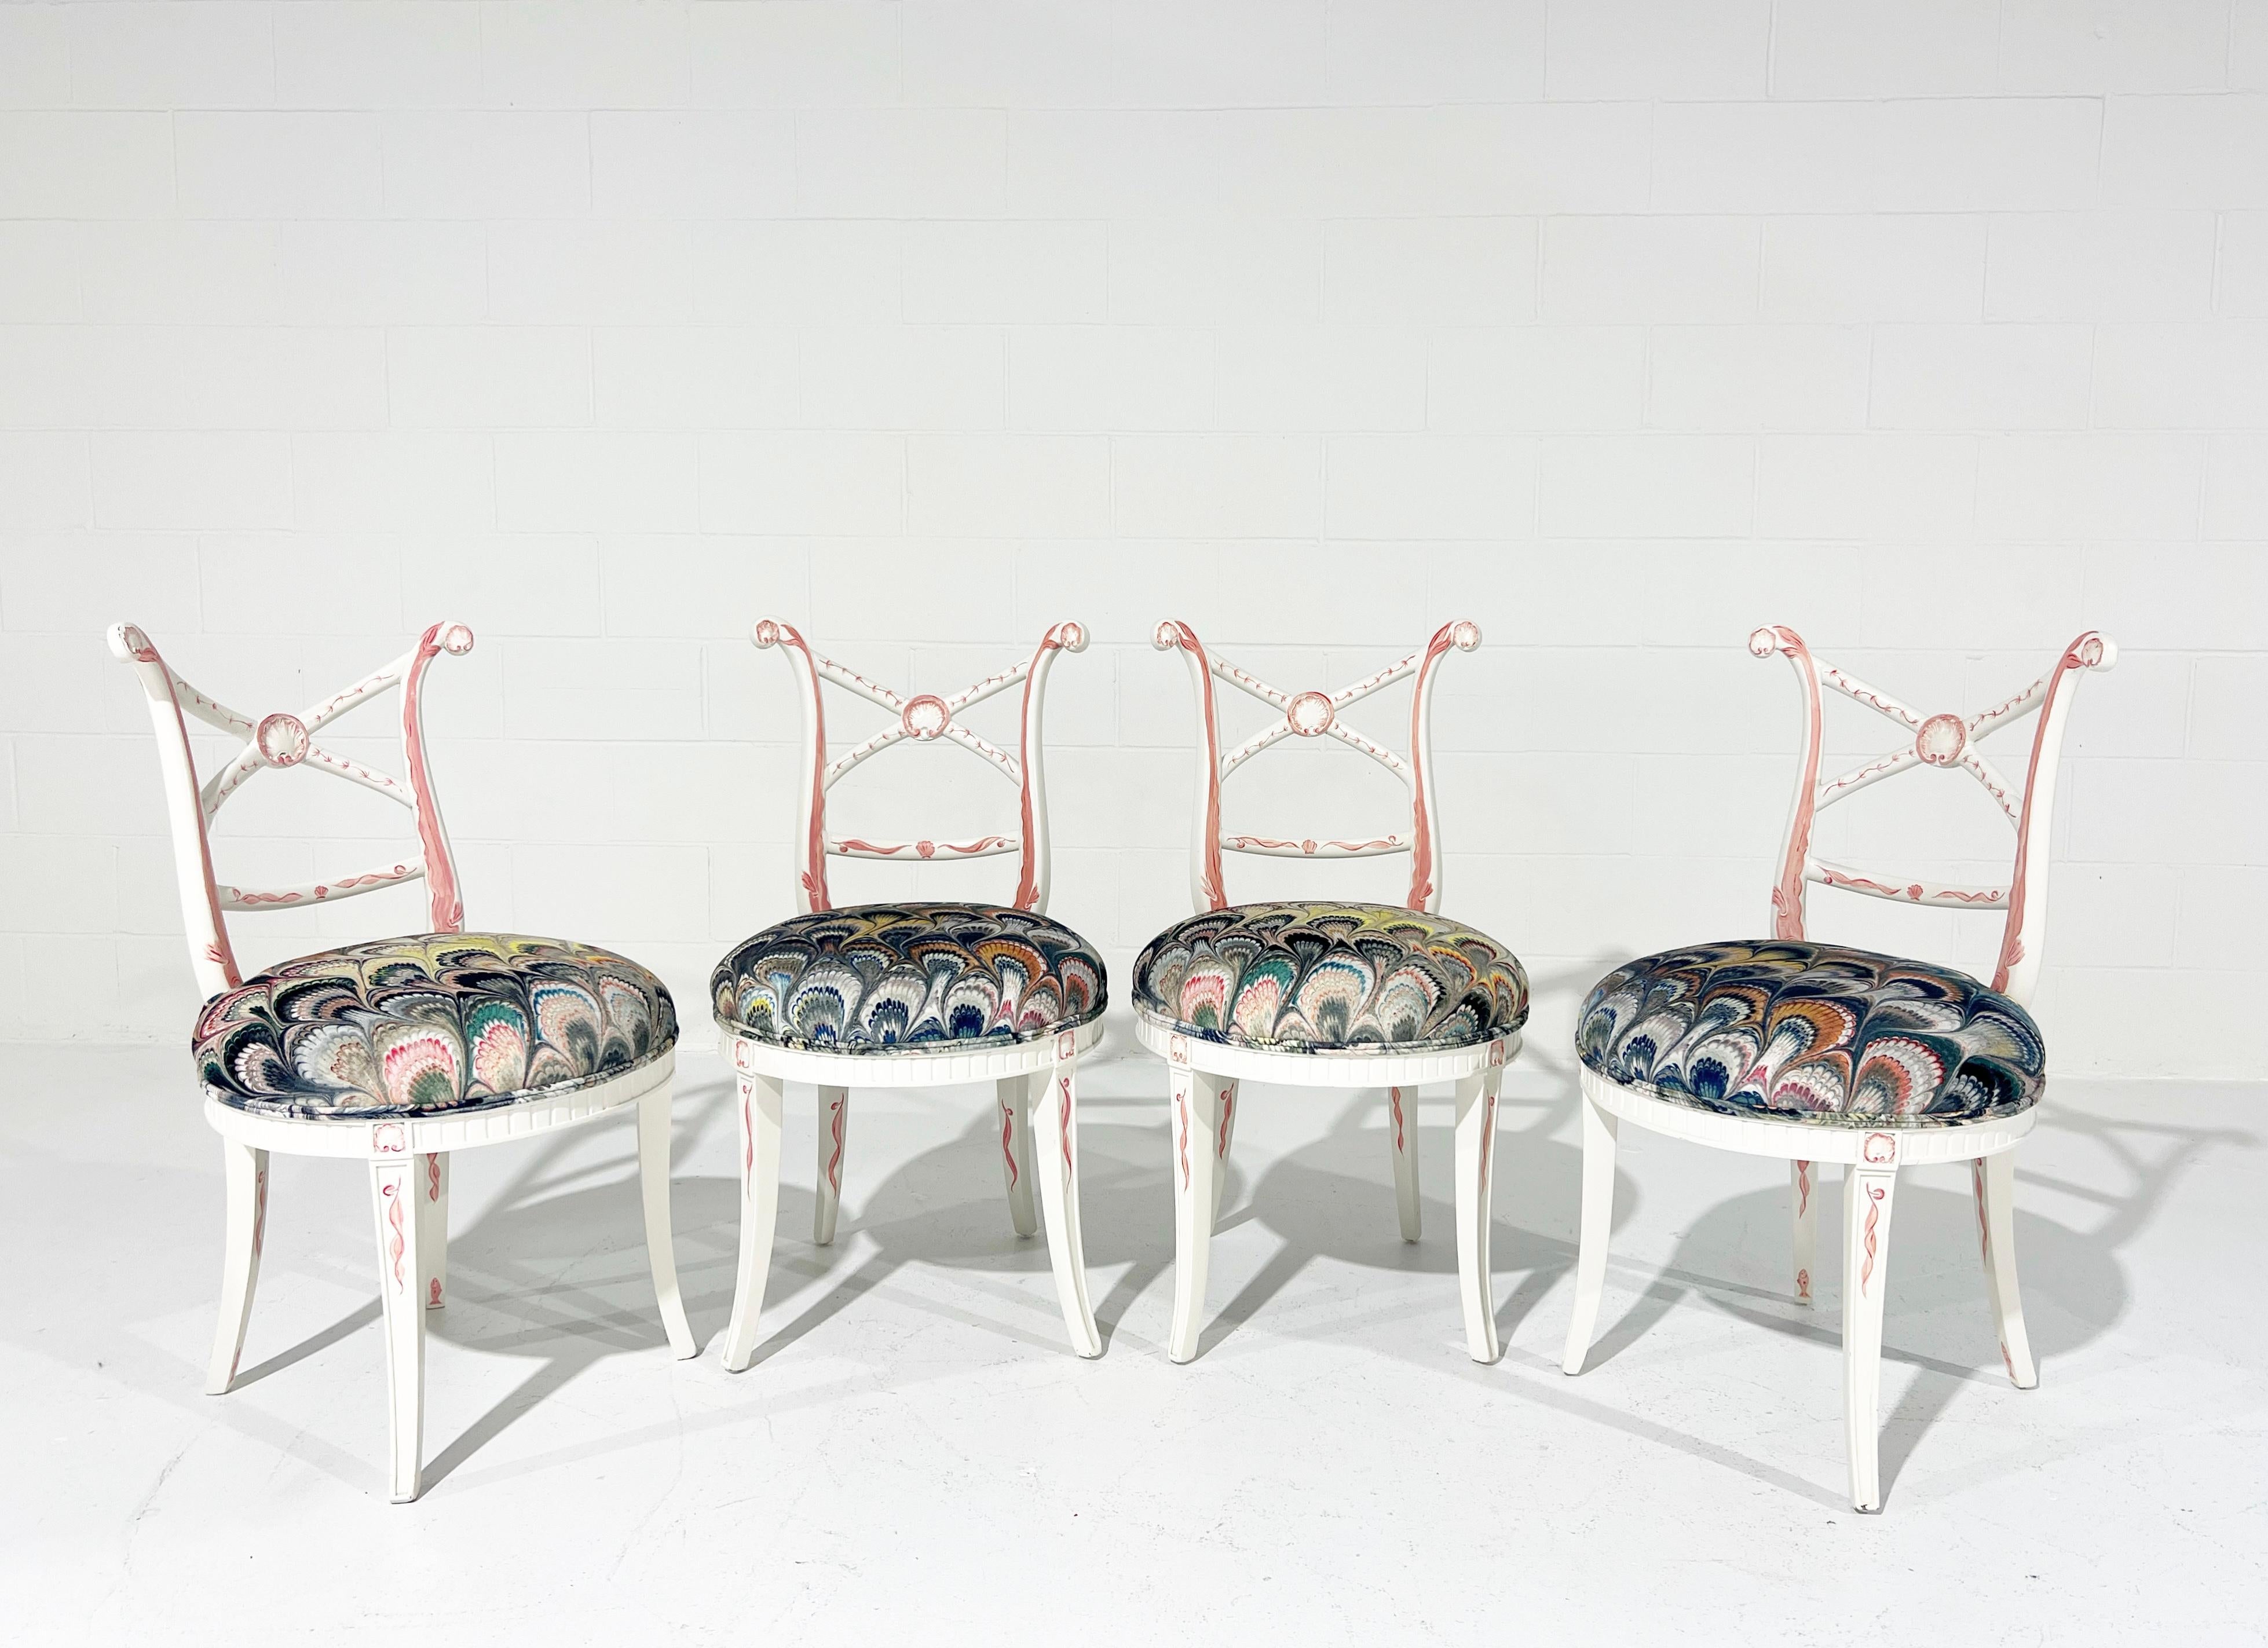 One-of-a-kind, Hand-Painted 'Sea Monsters' Chairs, Set of 4 For Sale 6